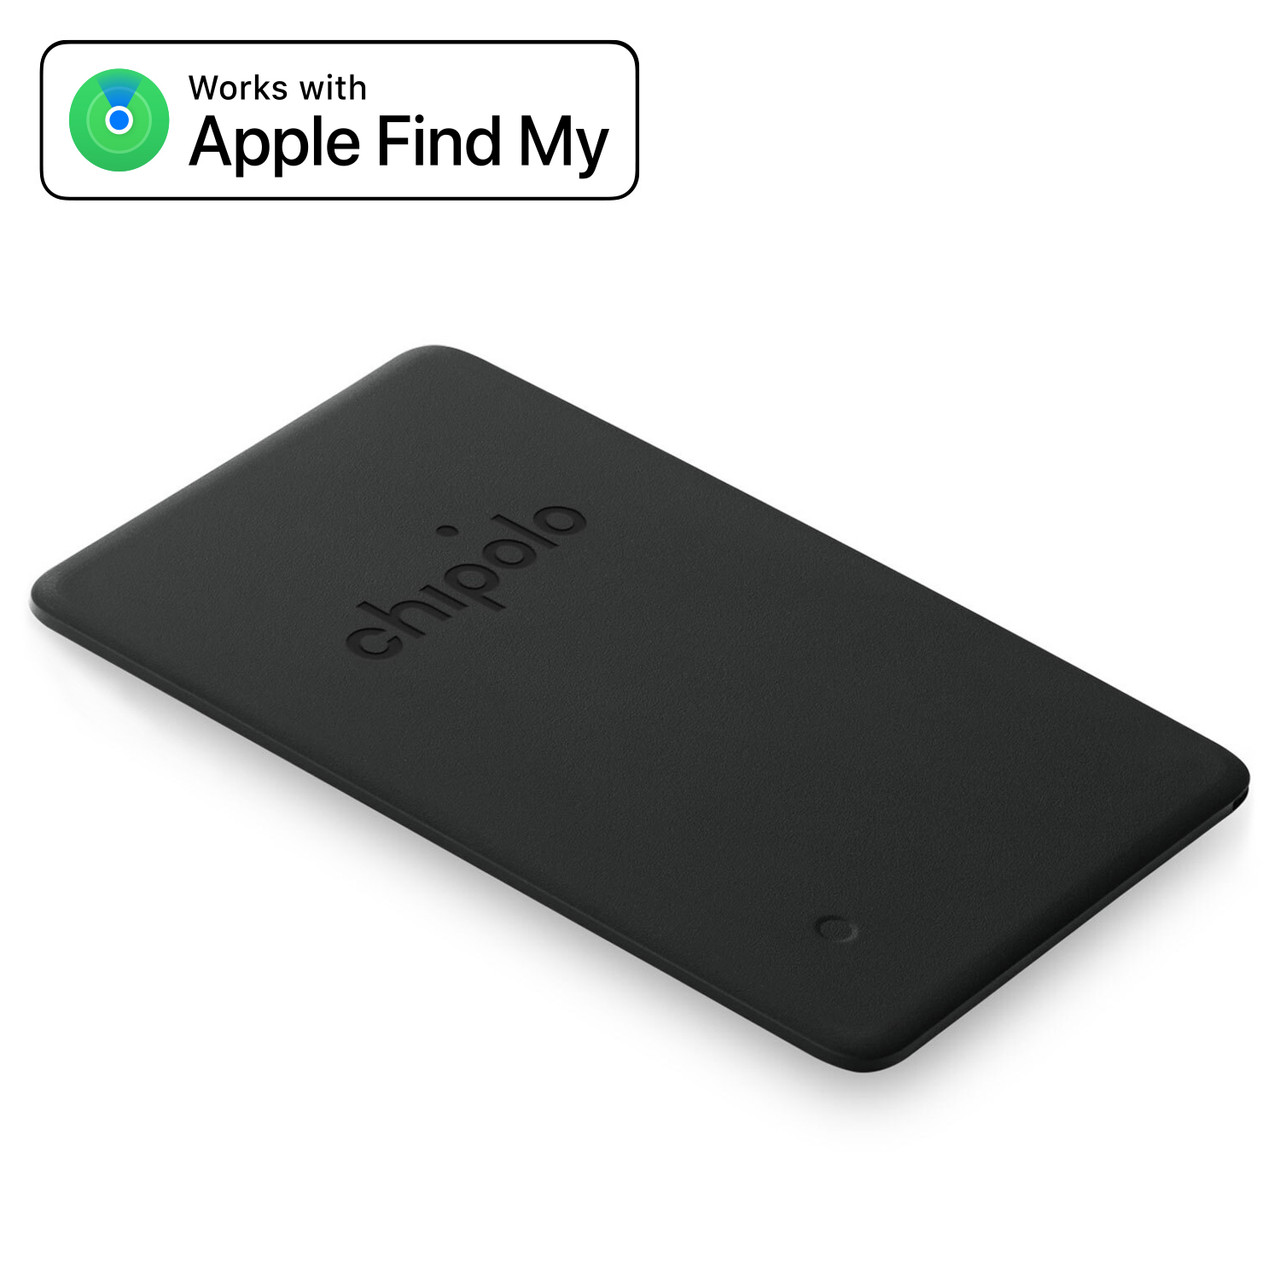 Chipolo CARD Spot - Works with the Apple Find My Network